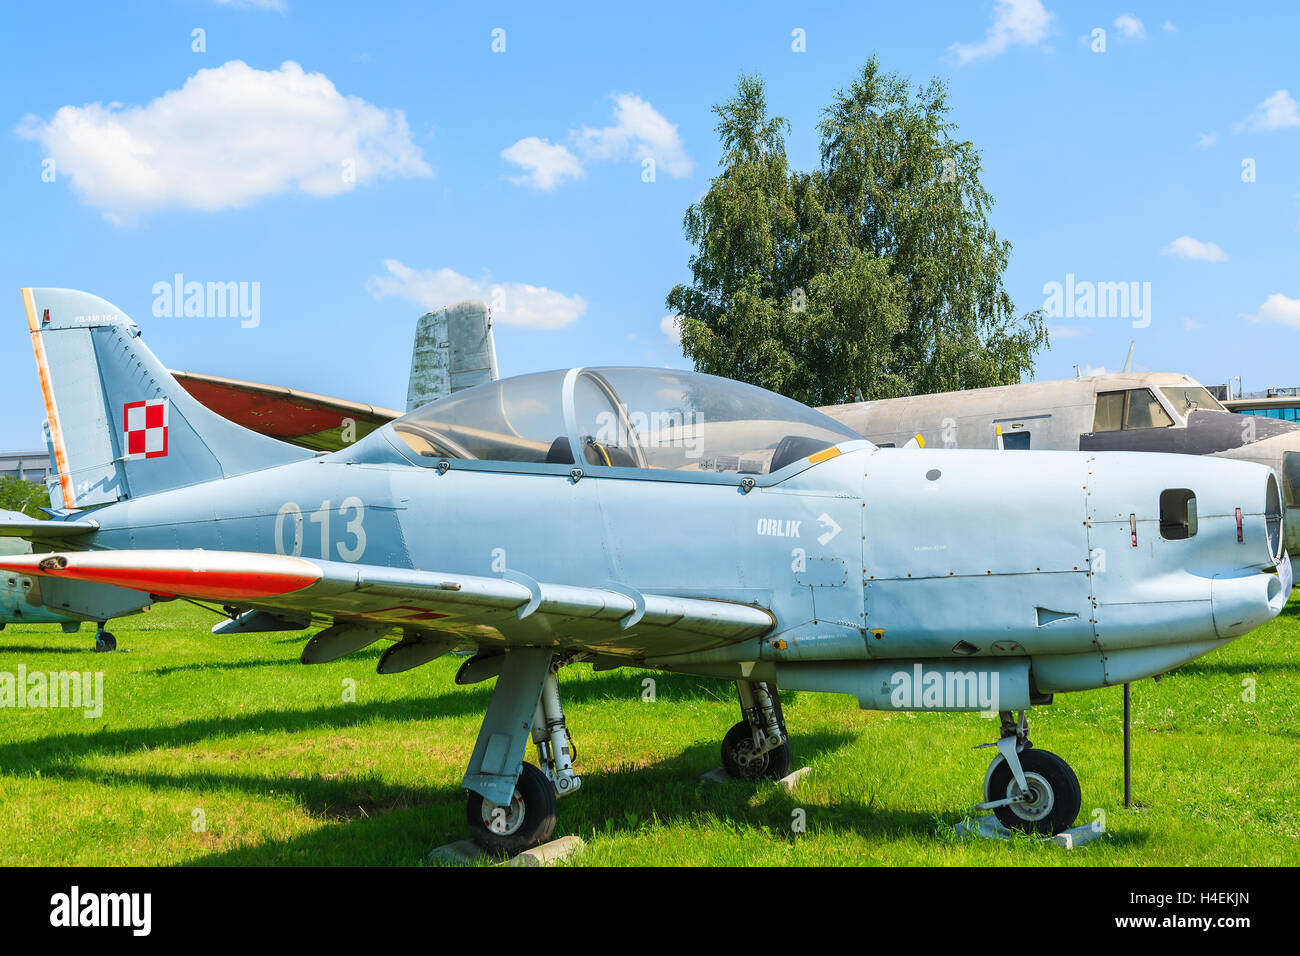 KRAKOW MUSEUM OF AVIATION, POLAND - JUL 27, 2014: military training aircraft 'Orlik' on exhibition in outdoor museum of aviation history in Krakow, Poland. In summer often airshows take place here. Stock Photo